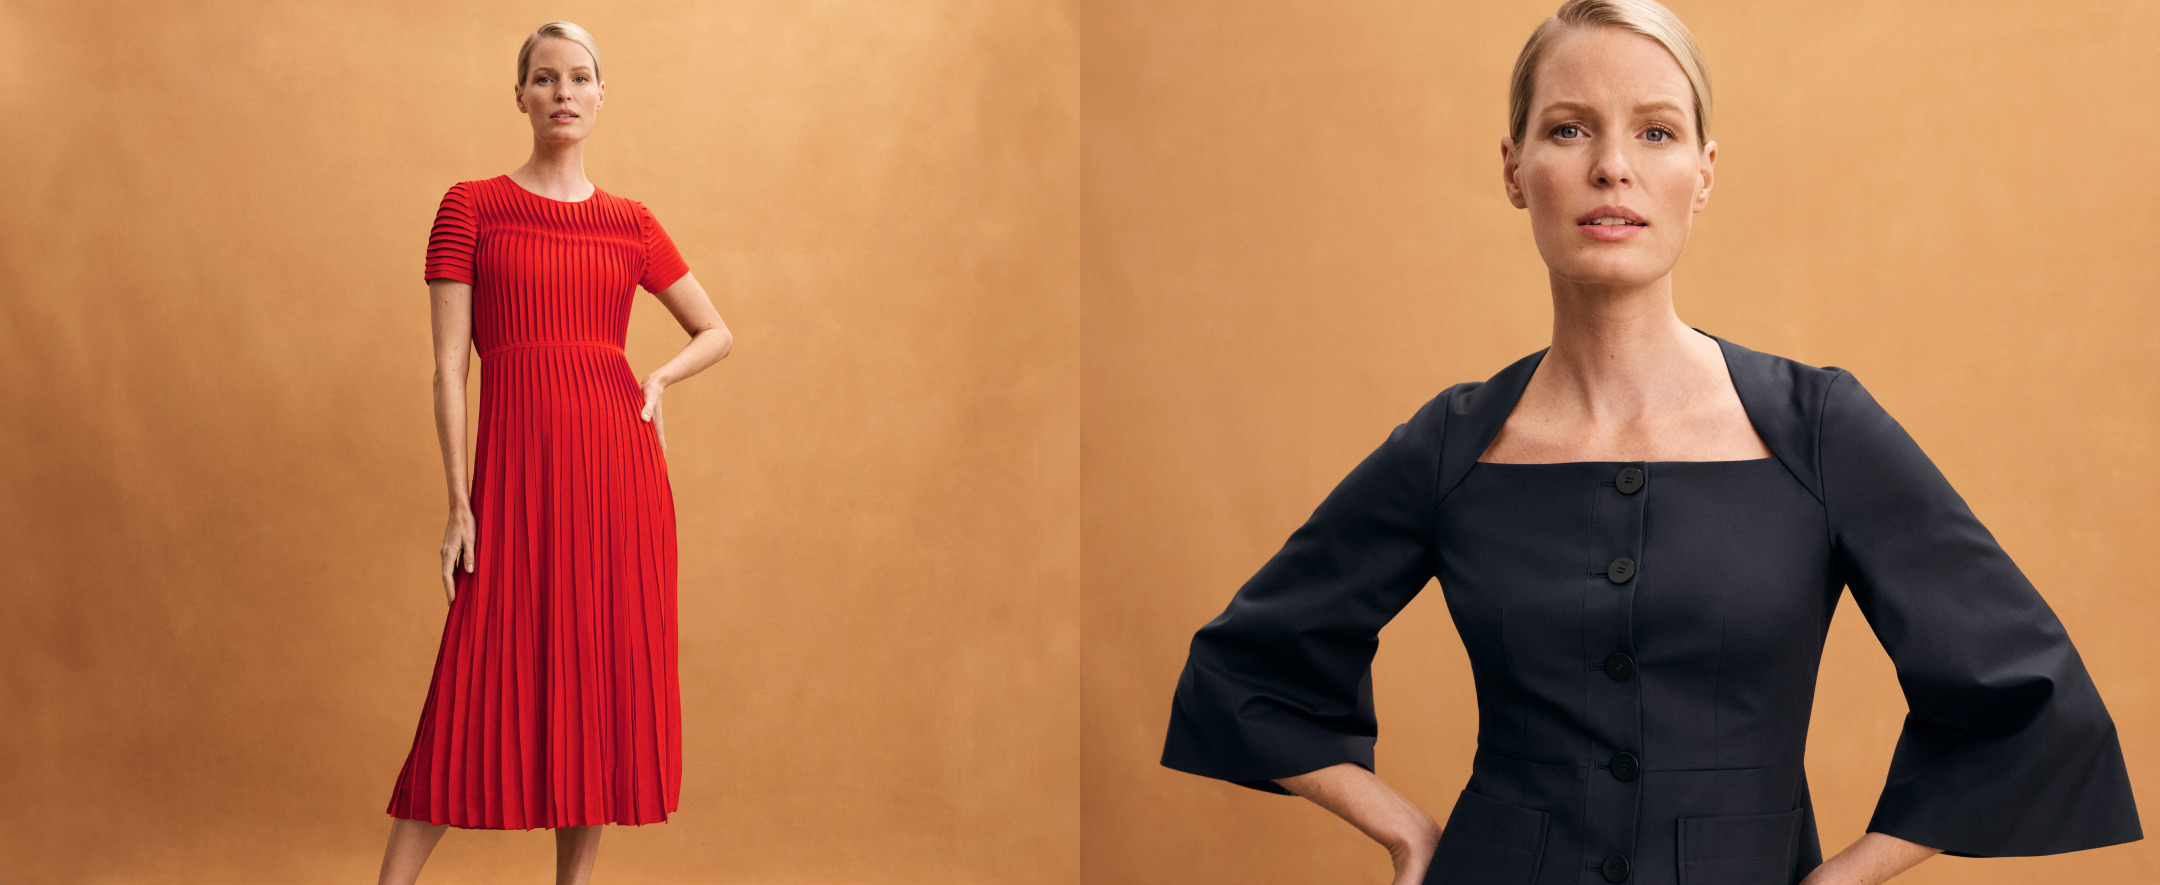 New In for April vivid red Allegra dress and navy Nemia jacket